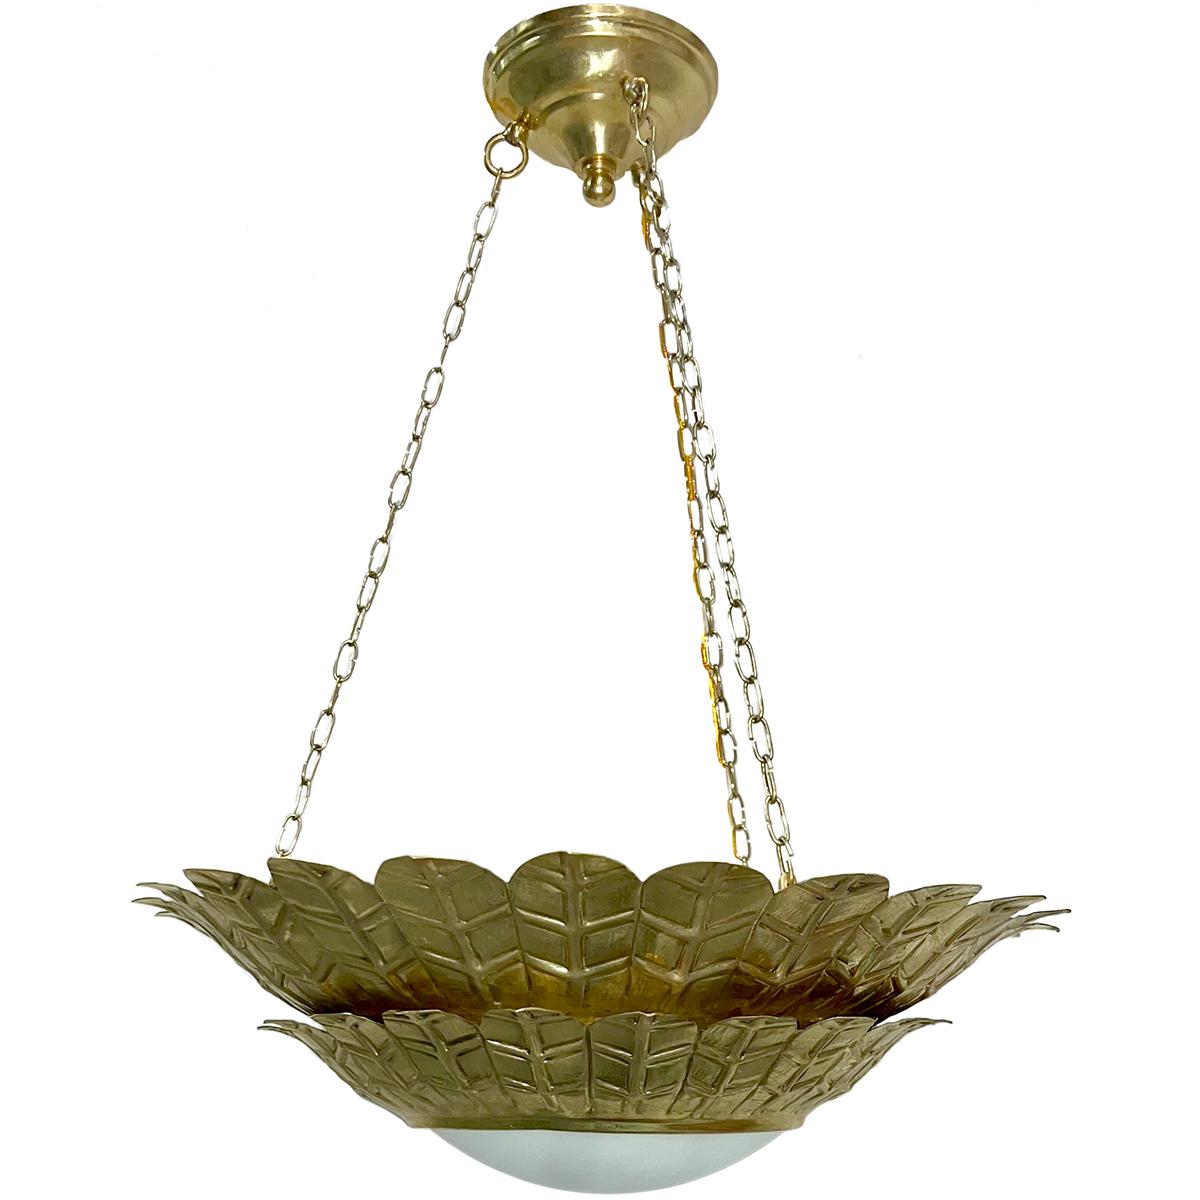 Set of 6 French 1940s double-tiered repousse' gilt light fixtures with interior lights. Sold individually.

Measurements:
Diameter 18